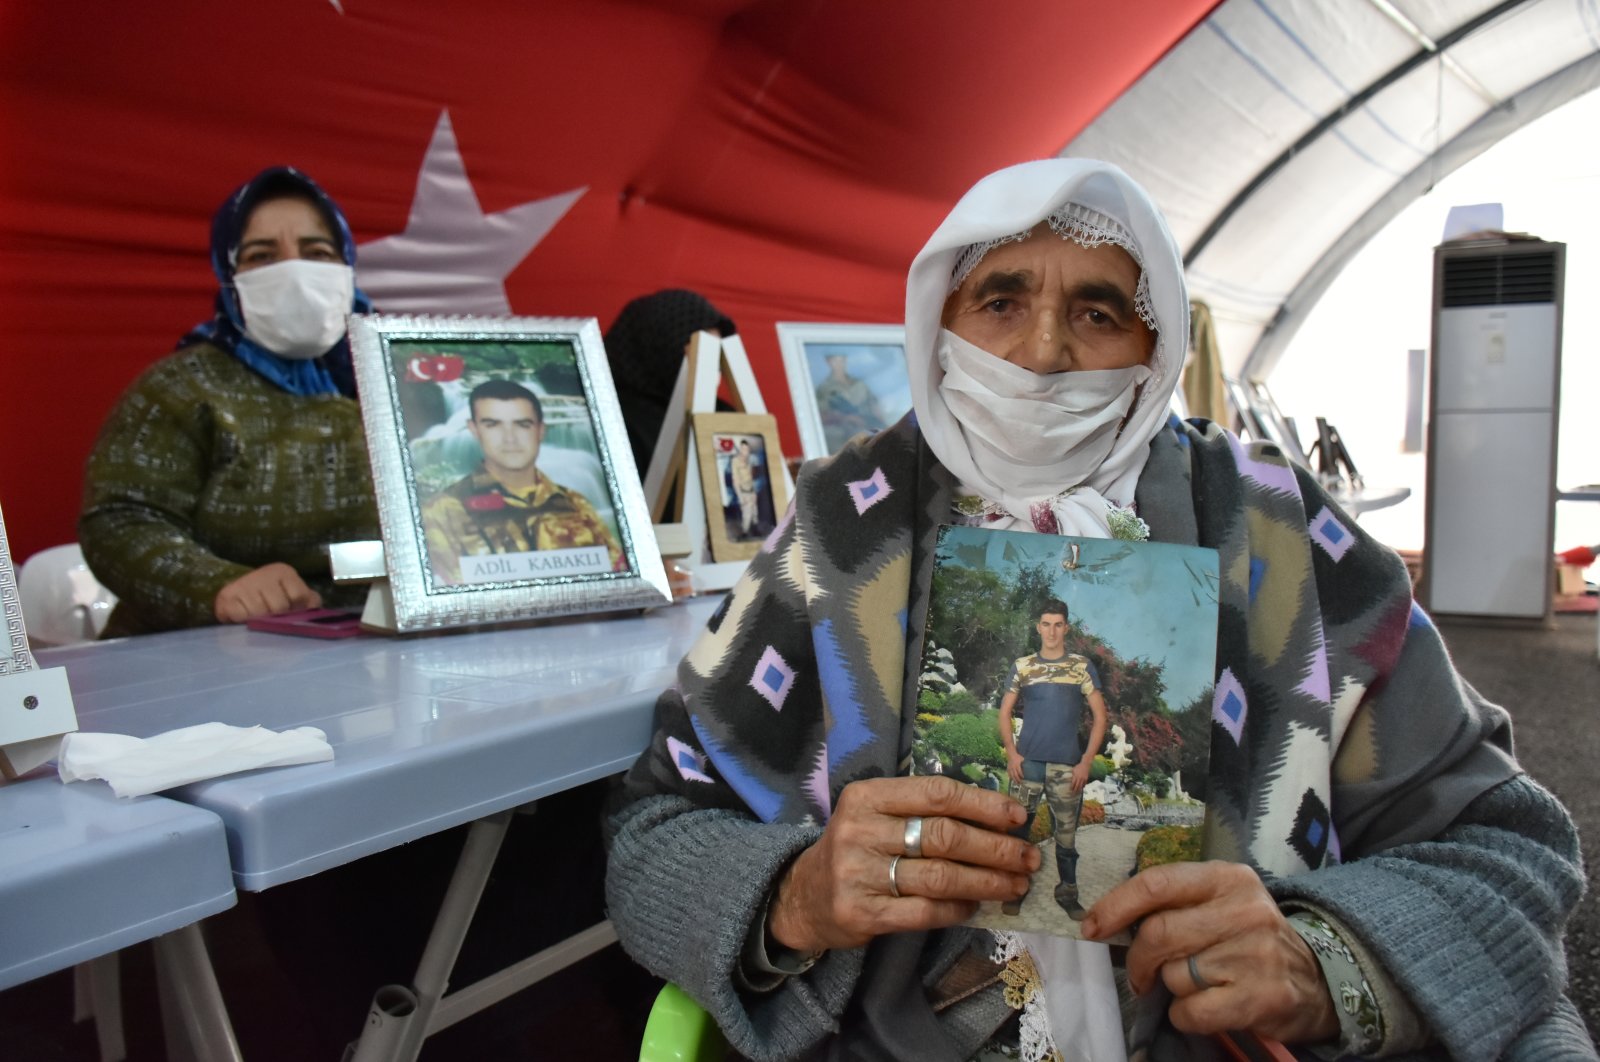 Cemile Koşar, a 90-year-old mother, joined a sit-in protest against the PKK terror group in Turkey's southeastern Diyarbakır province, Nov. 5, 2020. (AA Photo)